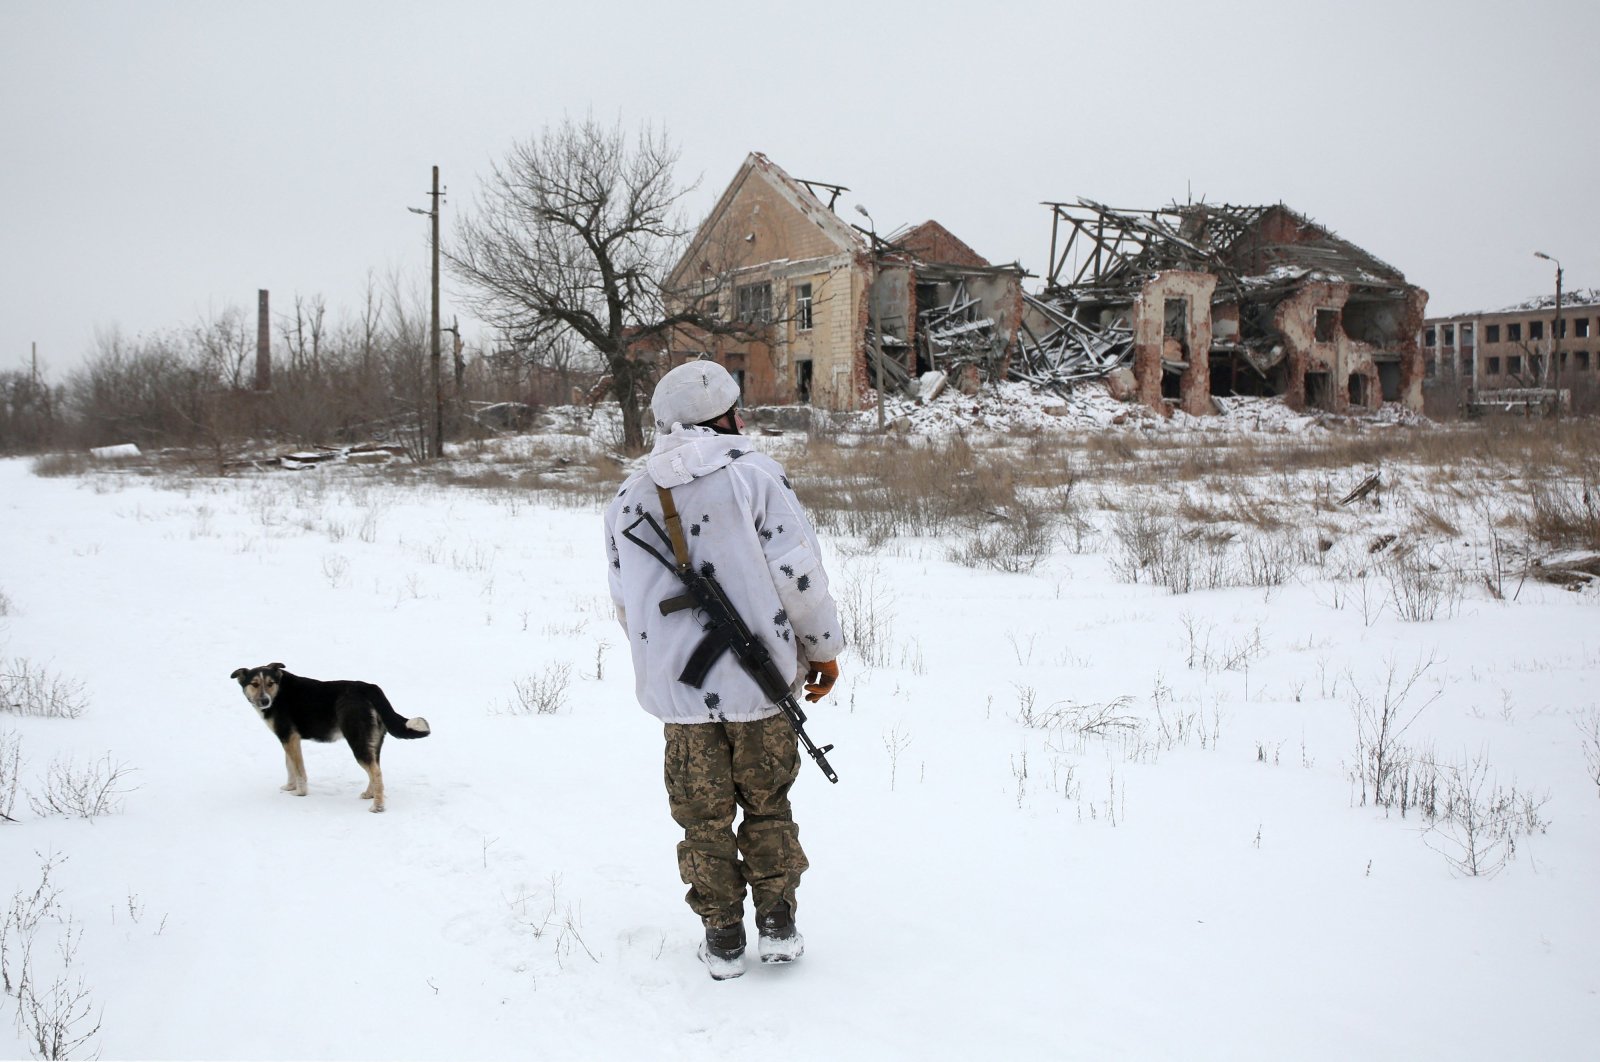 A Ukrainian officer walks in the village of Pesli, in eastern Ukraine&#039;s self-proclaimed Donetsk People&#039;s Republic (DPR), close to the frontline with Russia-backed separatists, Jan. 25, 2022. (AFP Photo)